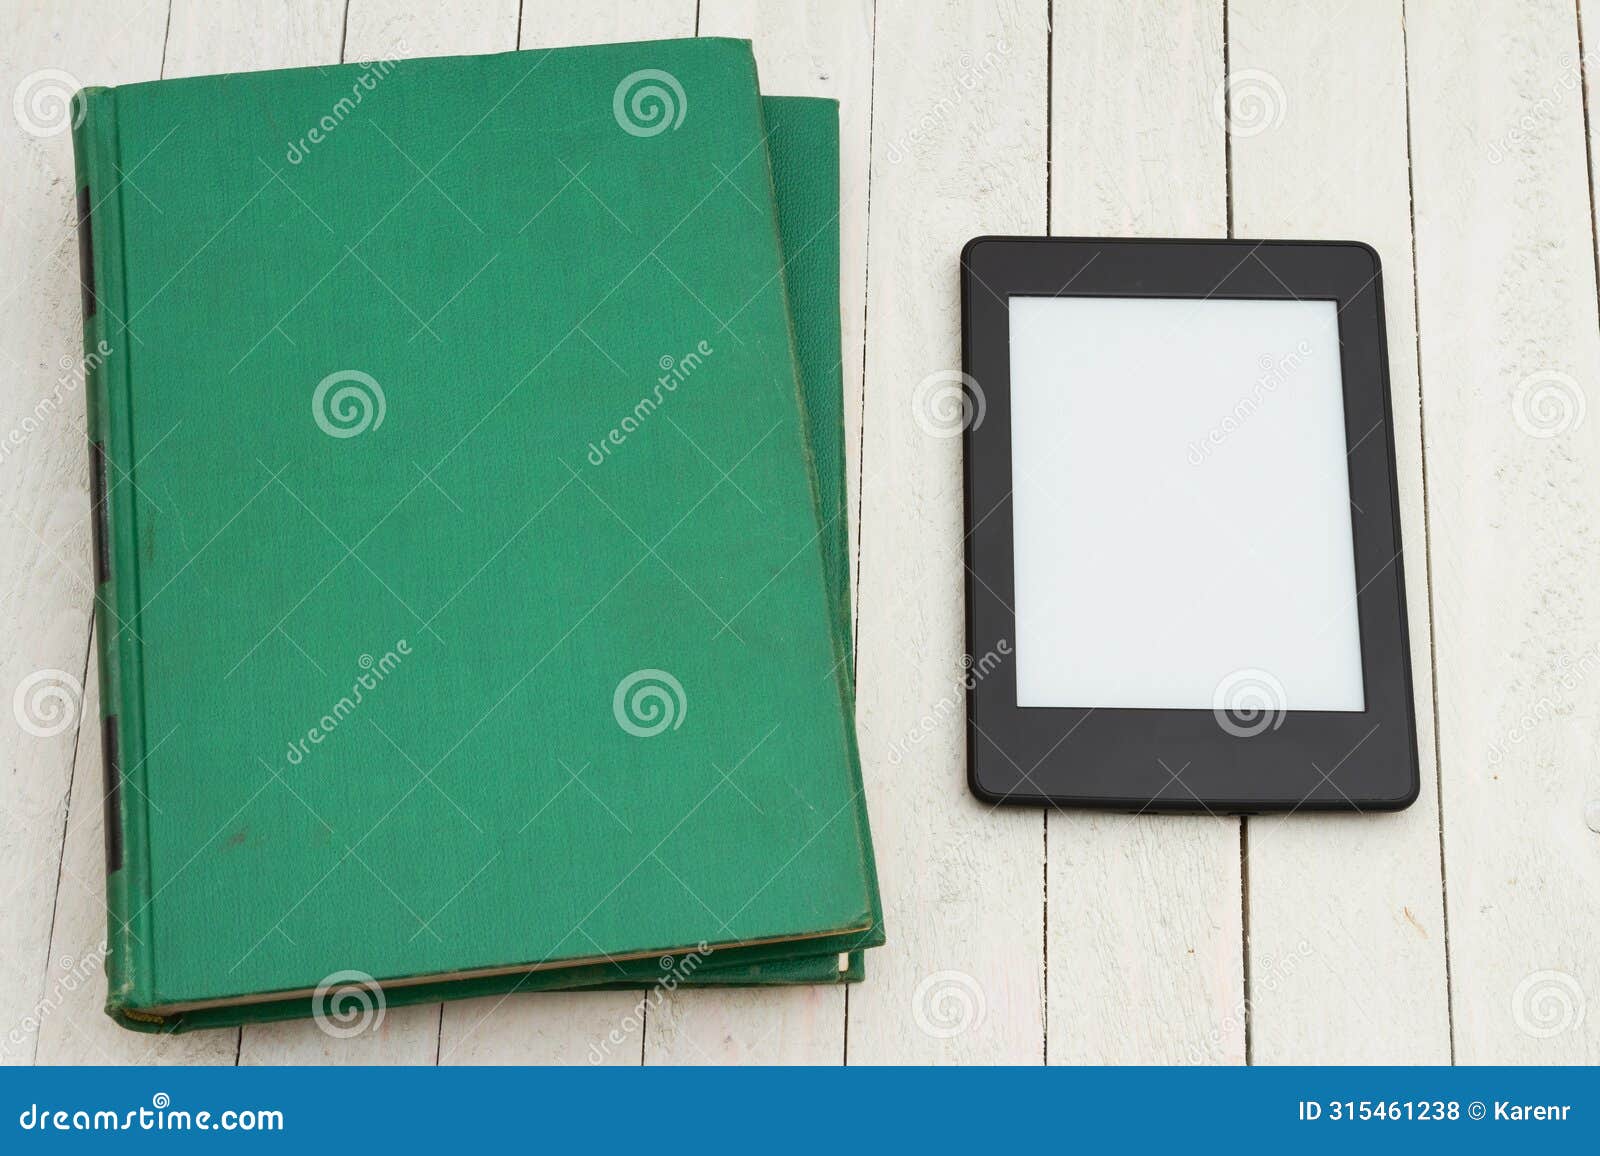 retro old green book on a desk with an ereader